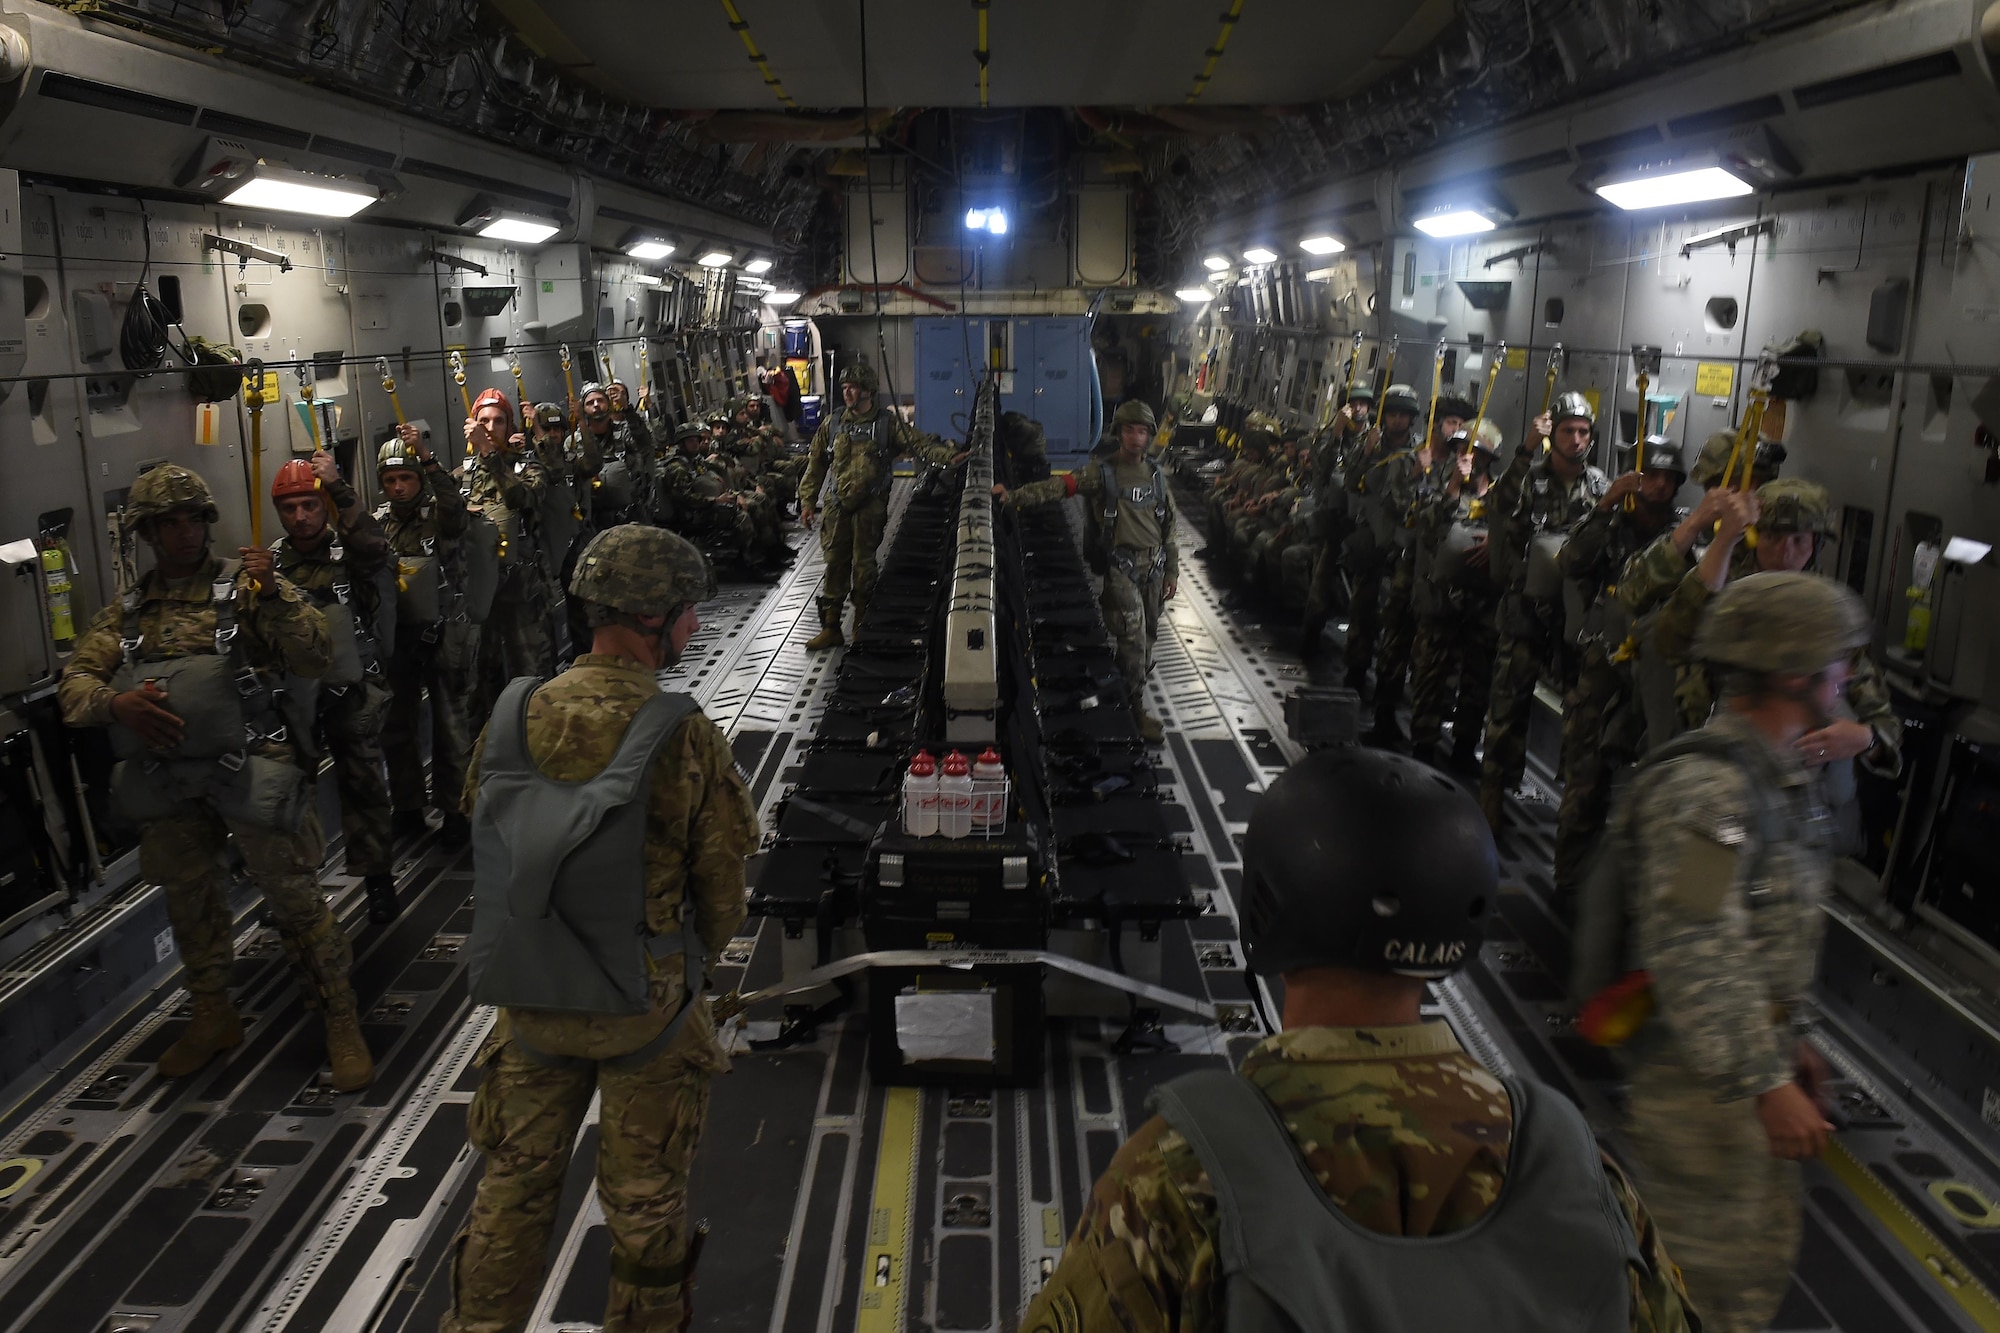 82nd Airborne Division and French paratroopers prepare to conduct a static-line jump from a 62nd Airlift Wing C-17 Globemaster III June 22, 2016, near Libreville, Gabon Africa during exercise Central Accord 2016. U.S. Army Africa's exercise Central Accord 2016 is an annual, combined, joint military exercise that brings together partner nations to practice and demonstrate proficiency in conducting peacekeeping operation. (U.S. Air Force photo/Tech. Sgt. Tim Chacon)